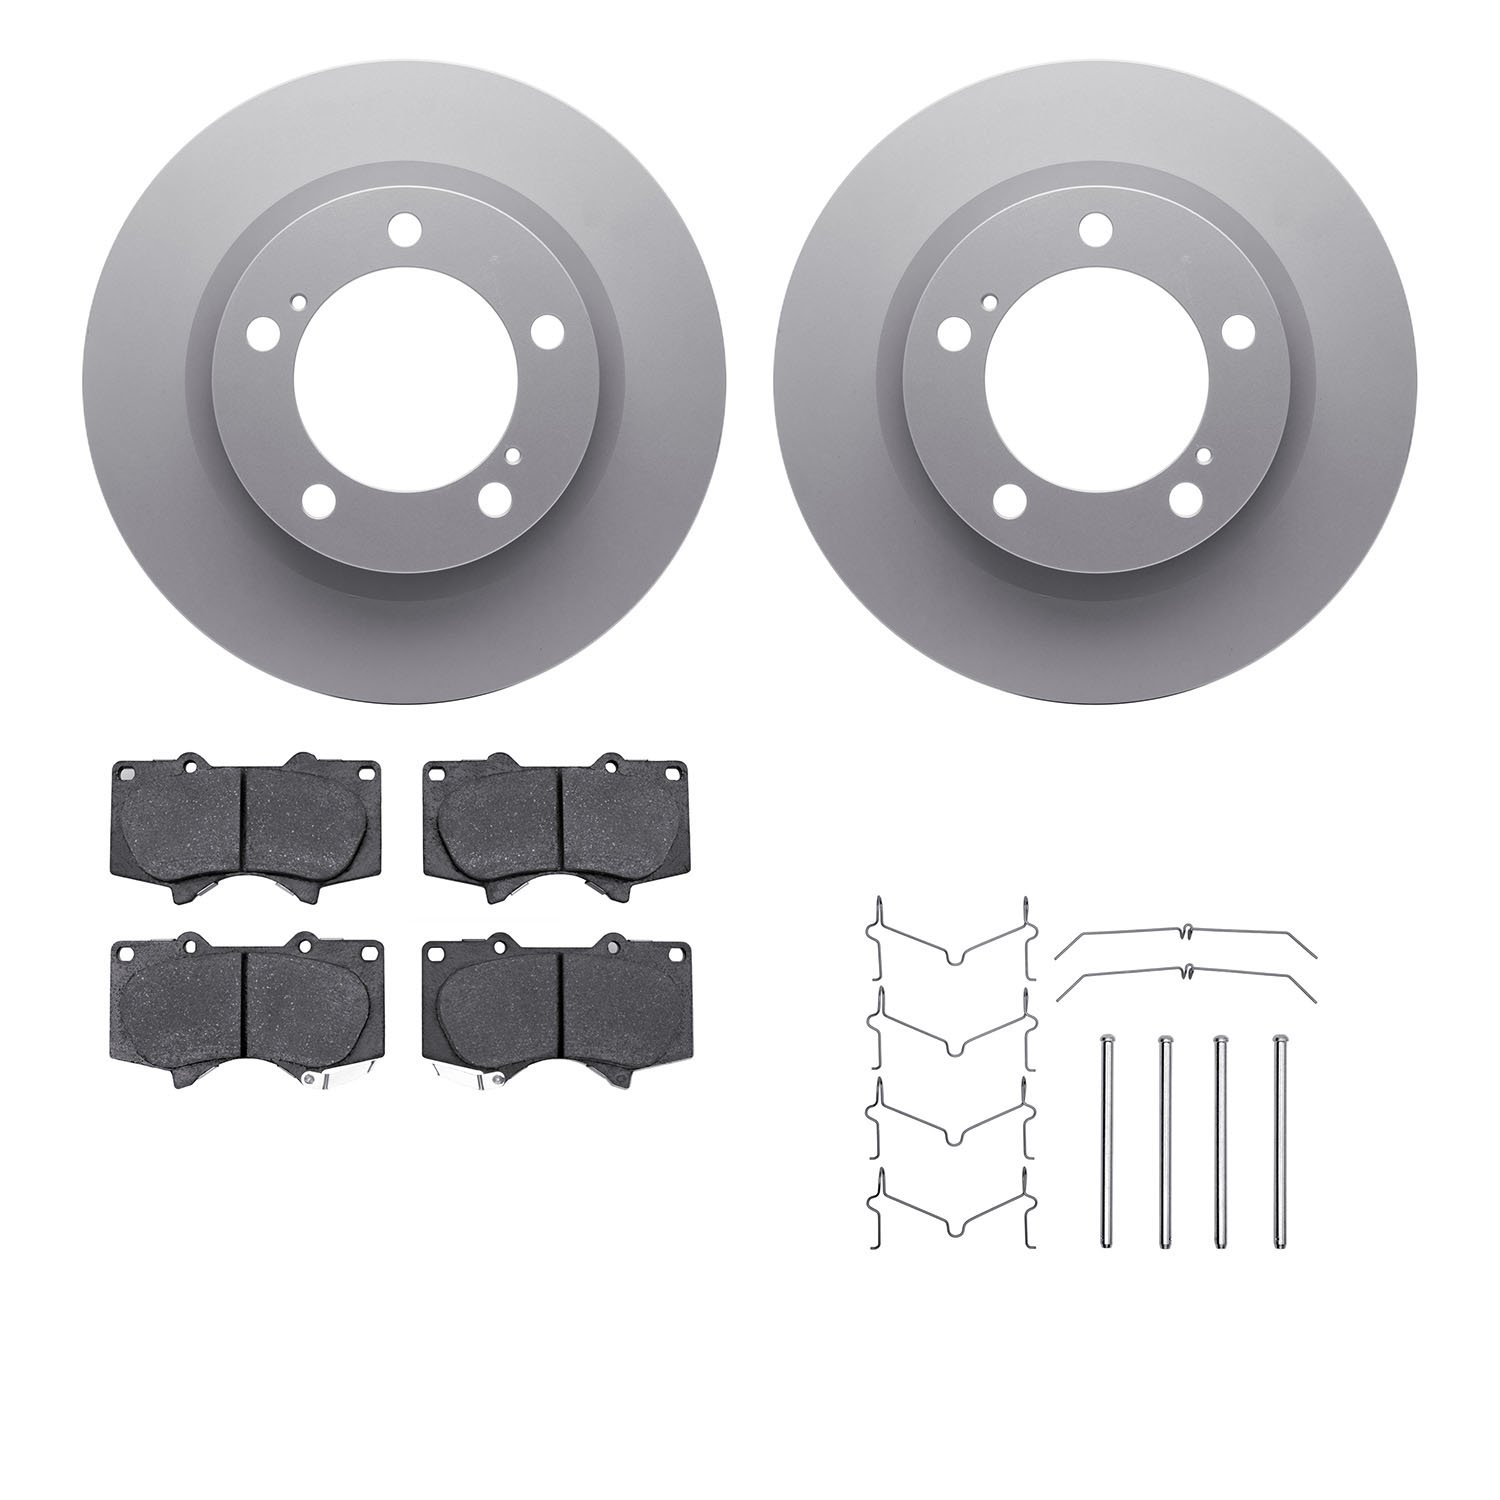 4412-76016 Geospec Brake Rotors with Ultimate-Duty Brake Pads & Hardware, Fits Select Lexus/Toyota/Scion, Position: Front